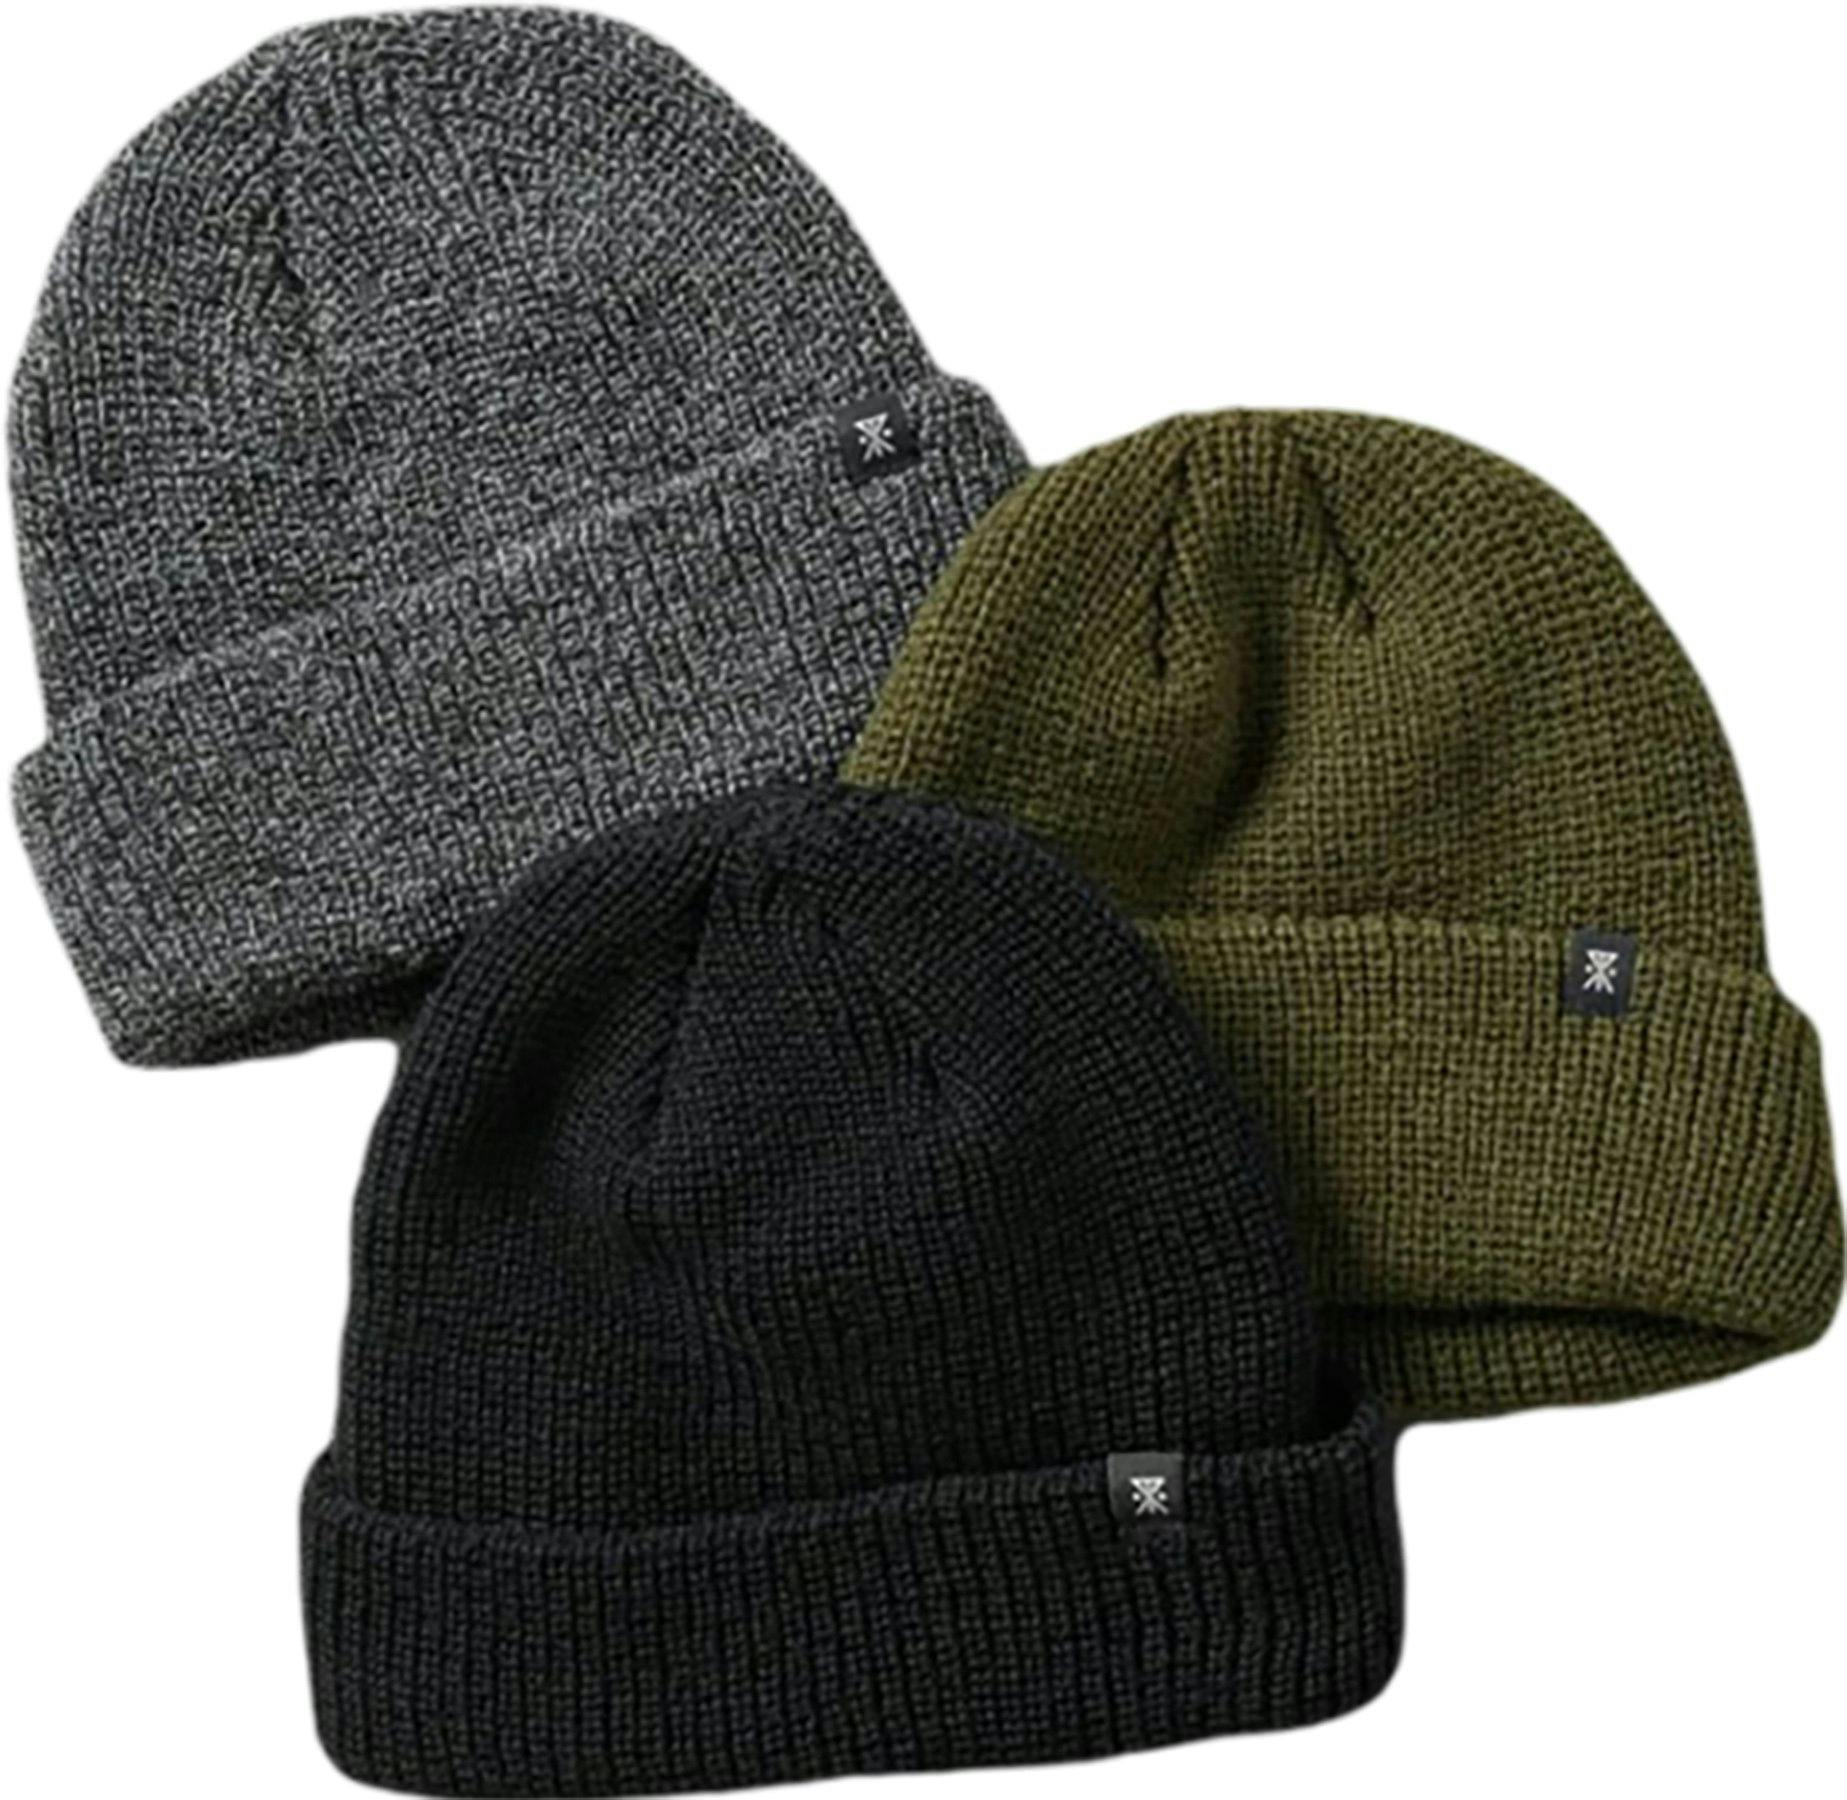 Product image for Turks 3-Pack Beanie - Men's